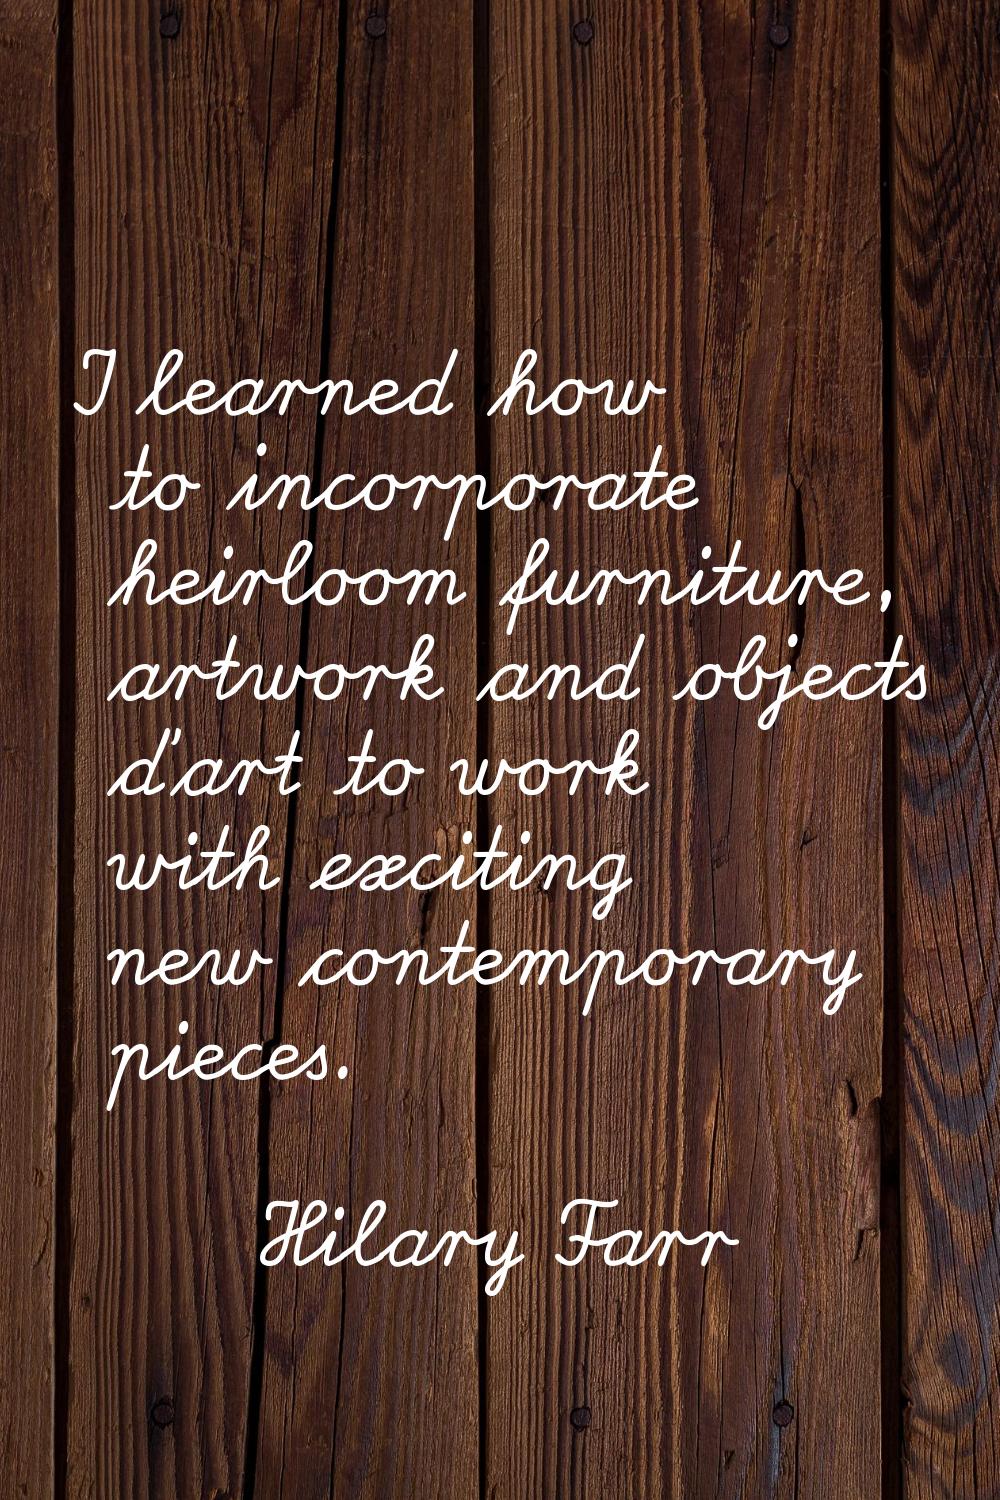 I learned how to incorporate heirloom furniture, artwork and objects d'art to work with exciting ne